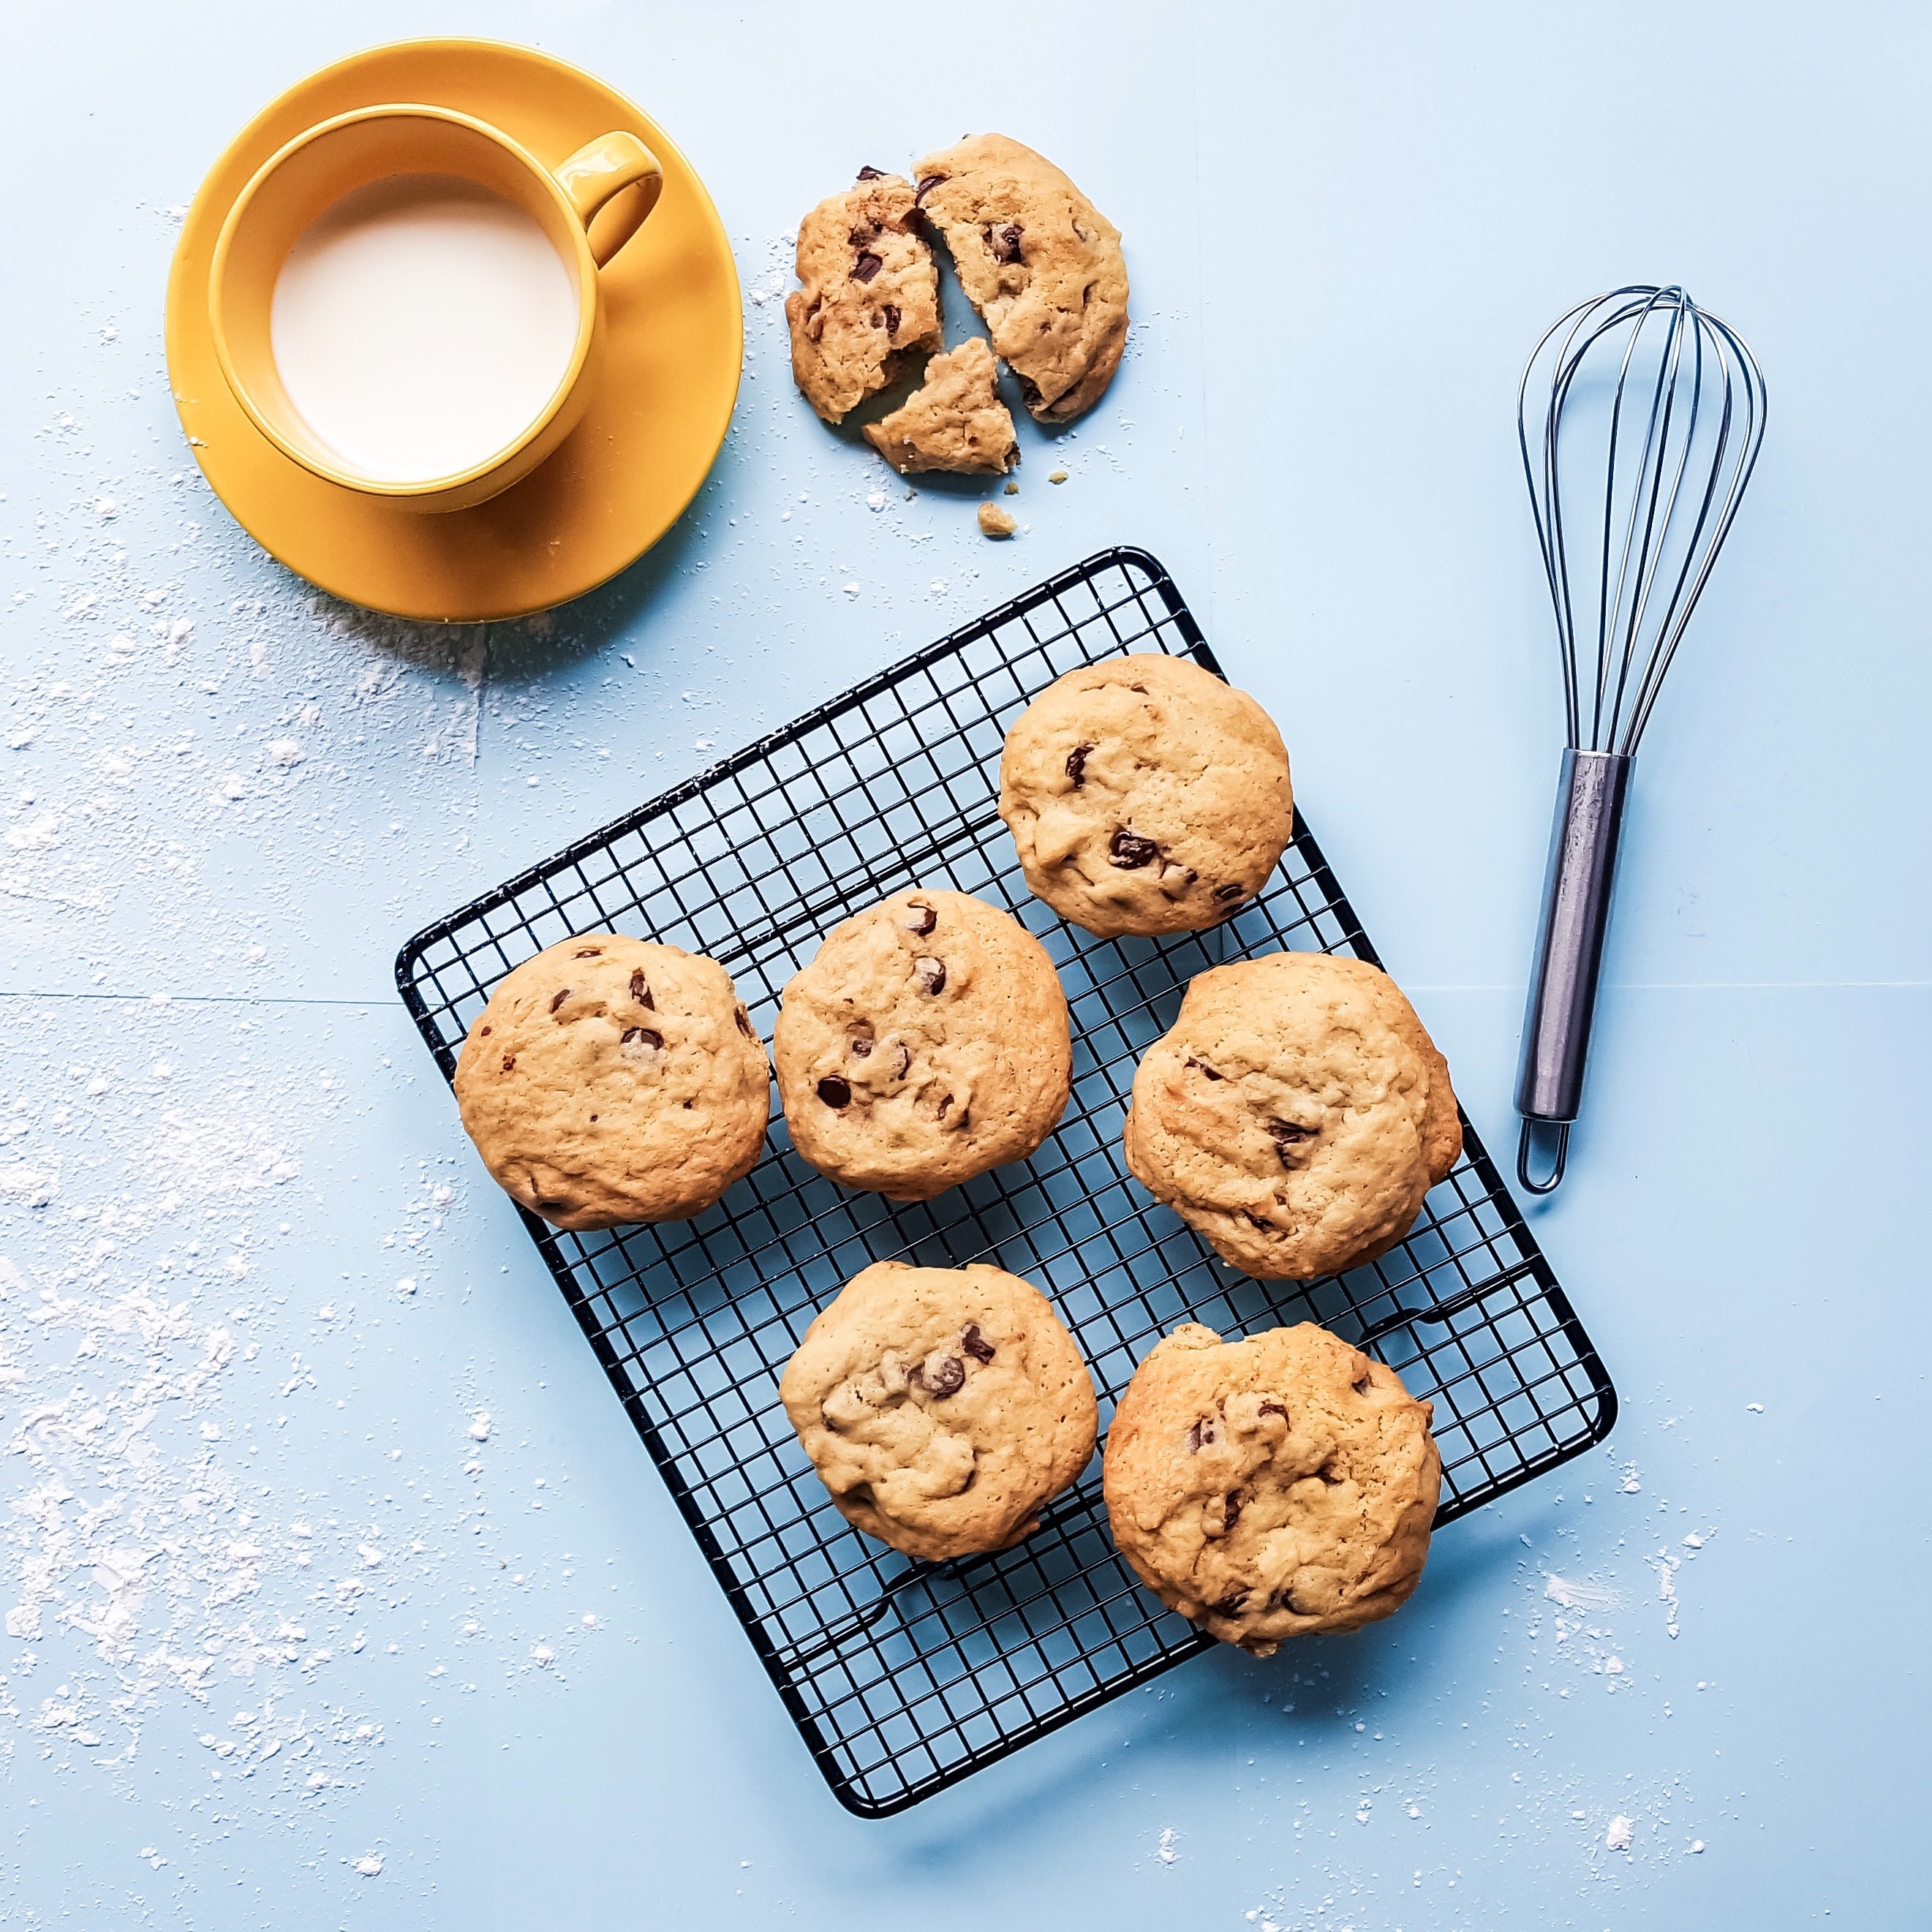 5 Baking Tiktokers that will satisfy your cravings | Baking influencers